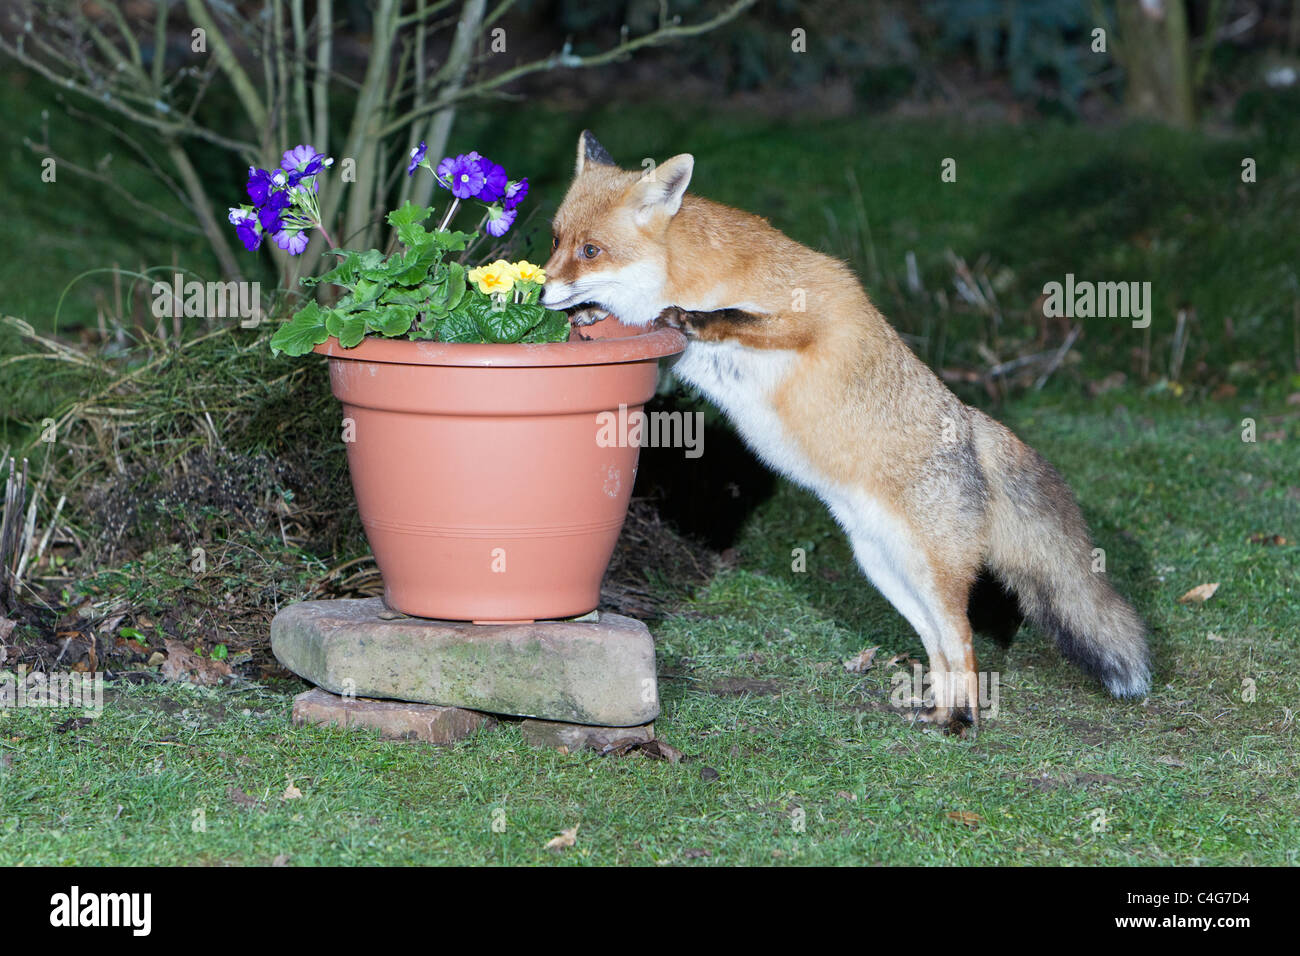 European Fox (Vulpes vulpes), sniffing at flowers in plant pot Stock Photo